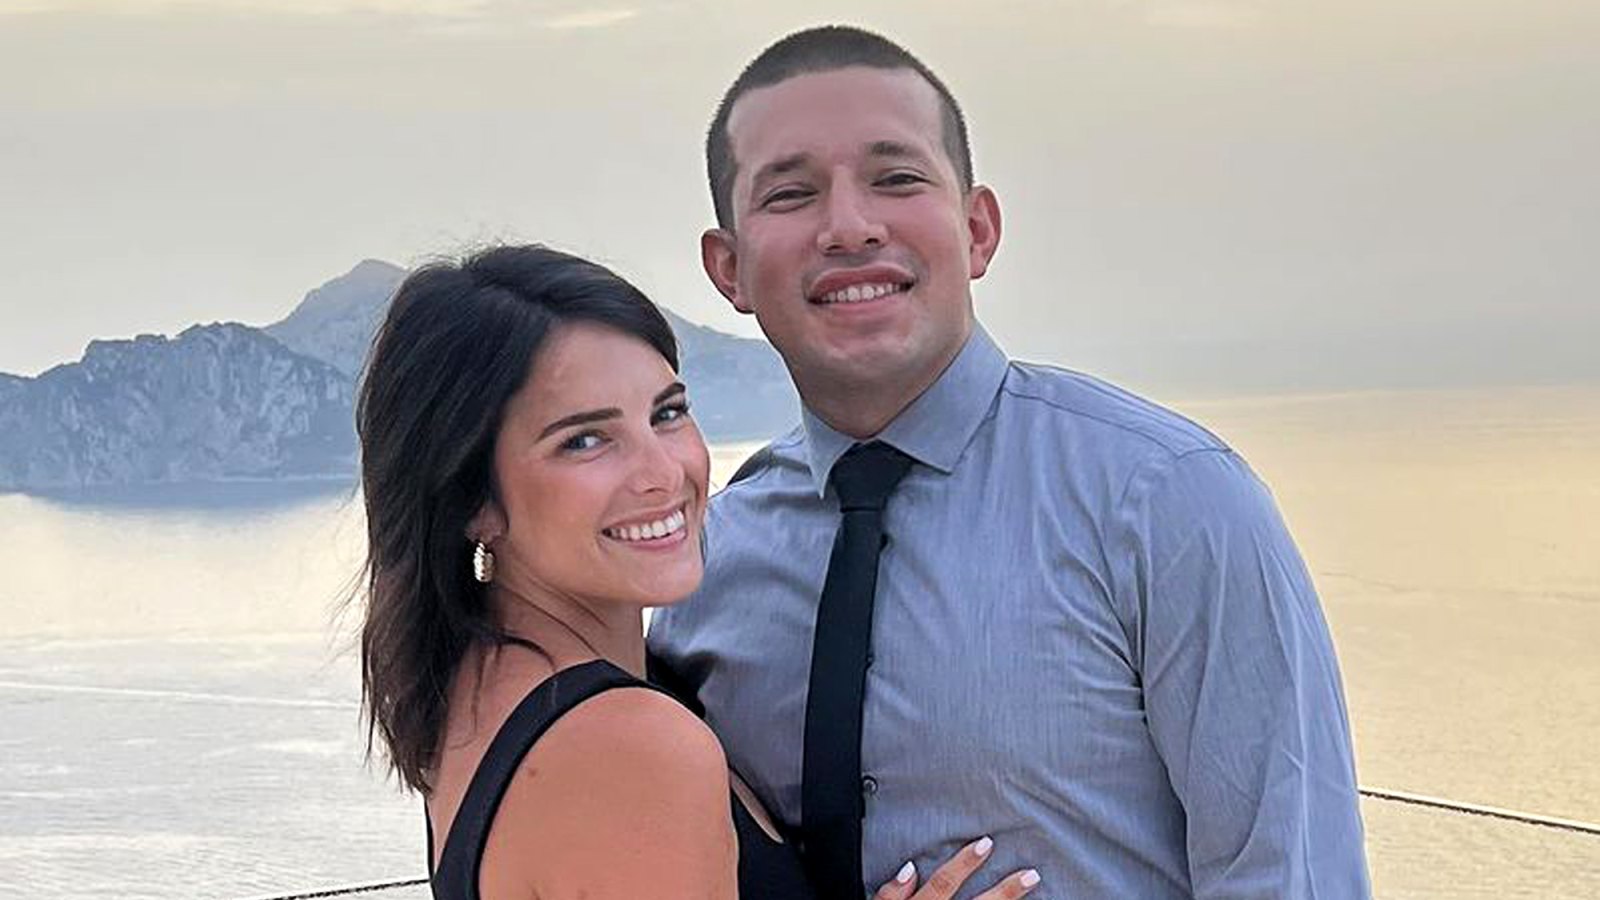 'Teen Mom’ Alum Javi Marroquin and Girlfriend Lauren Comeau Expecting 2nd Baby Together